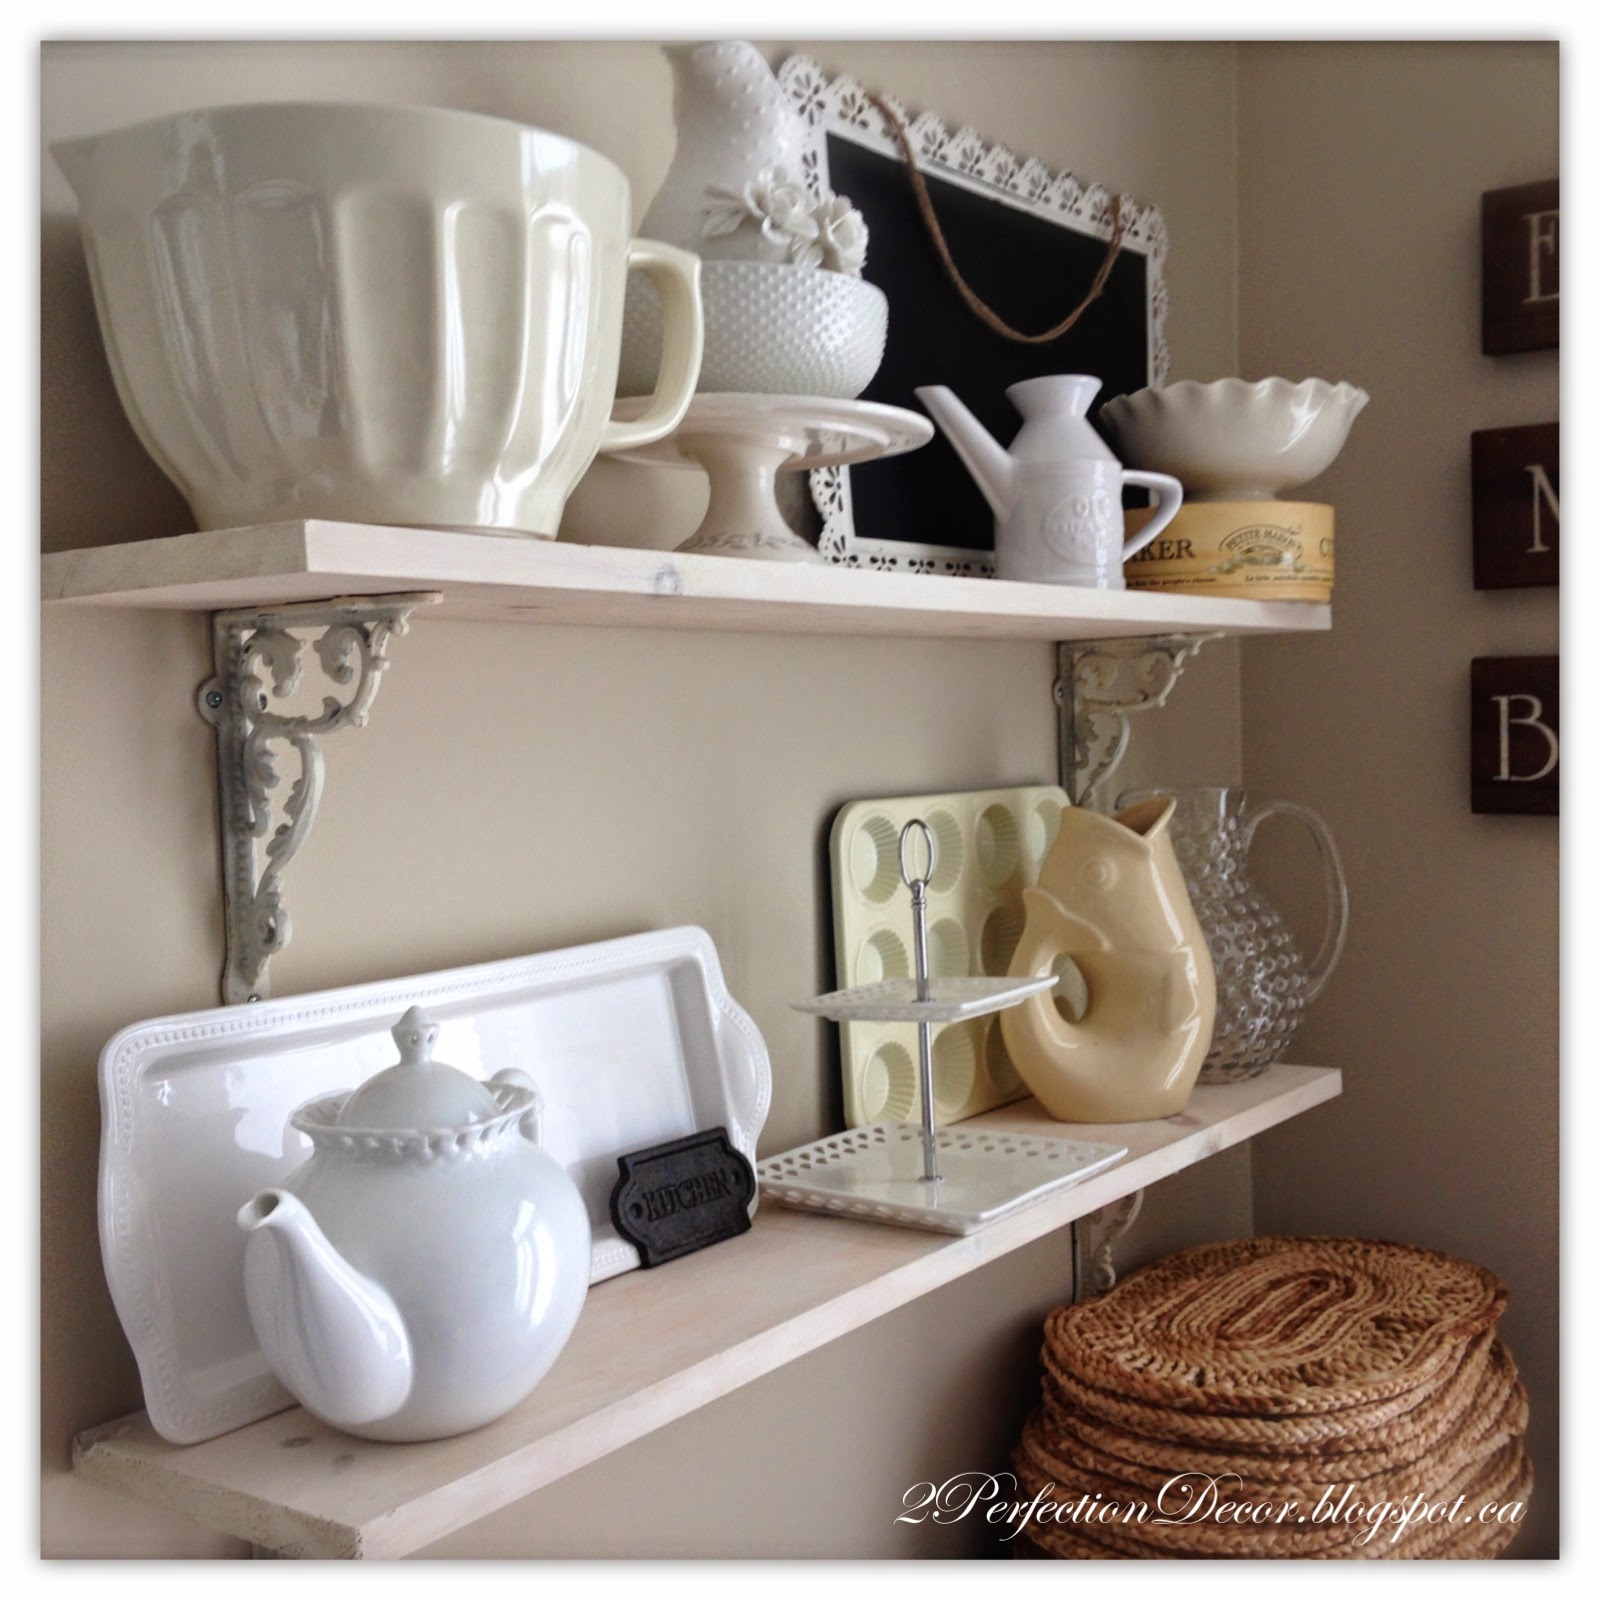 2Perfection Decor: Add Vintage Charm to your home by adding Corbels